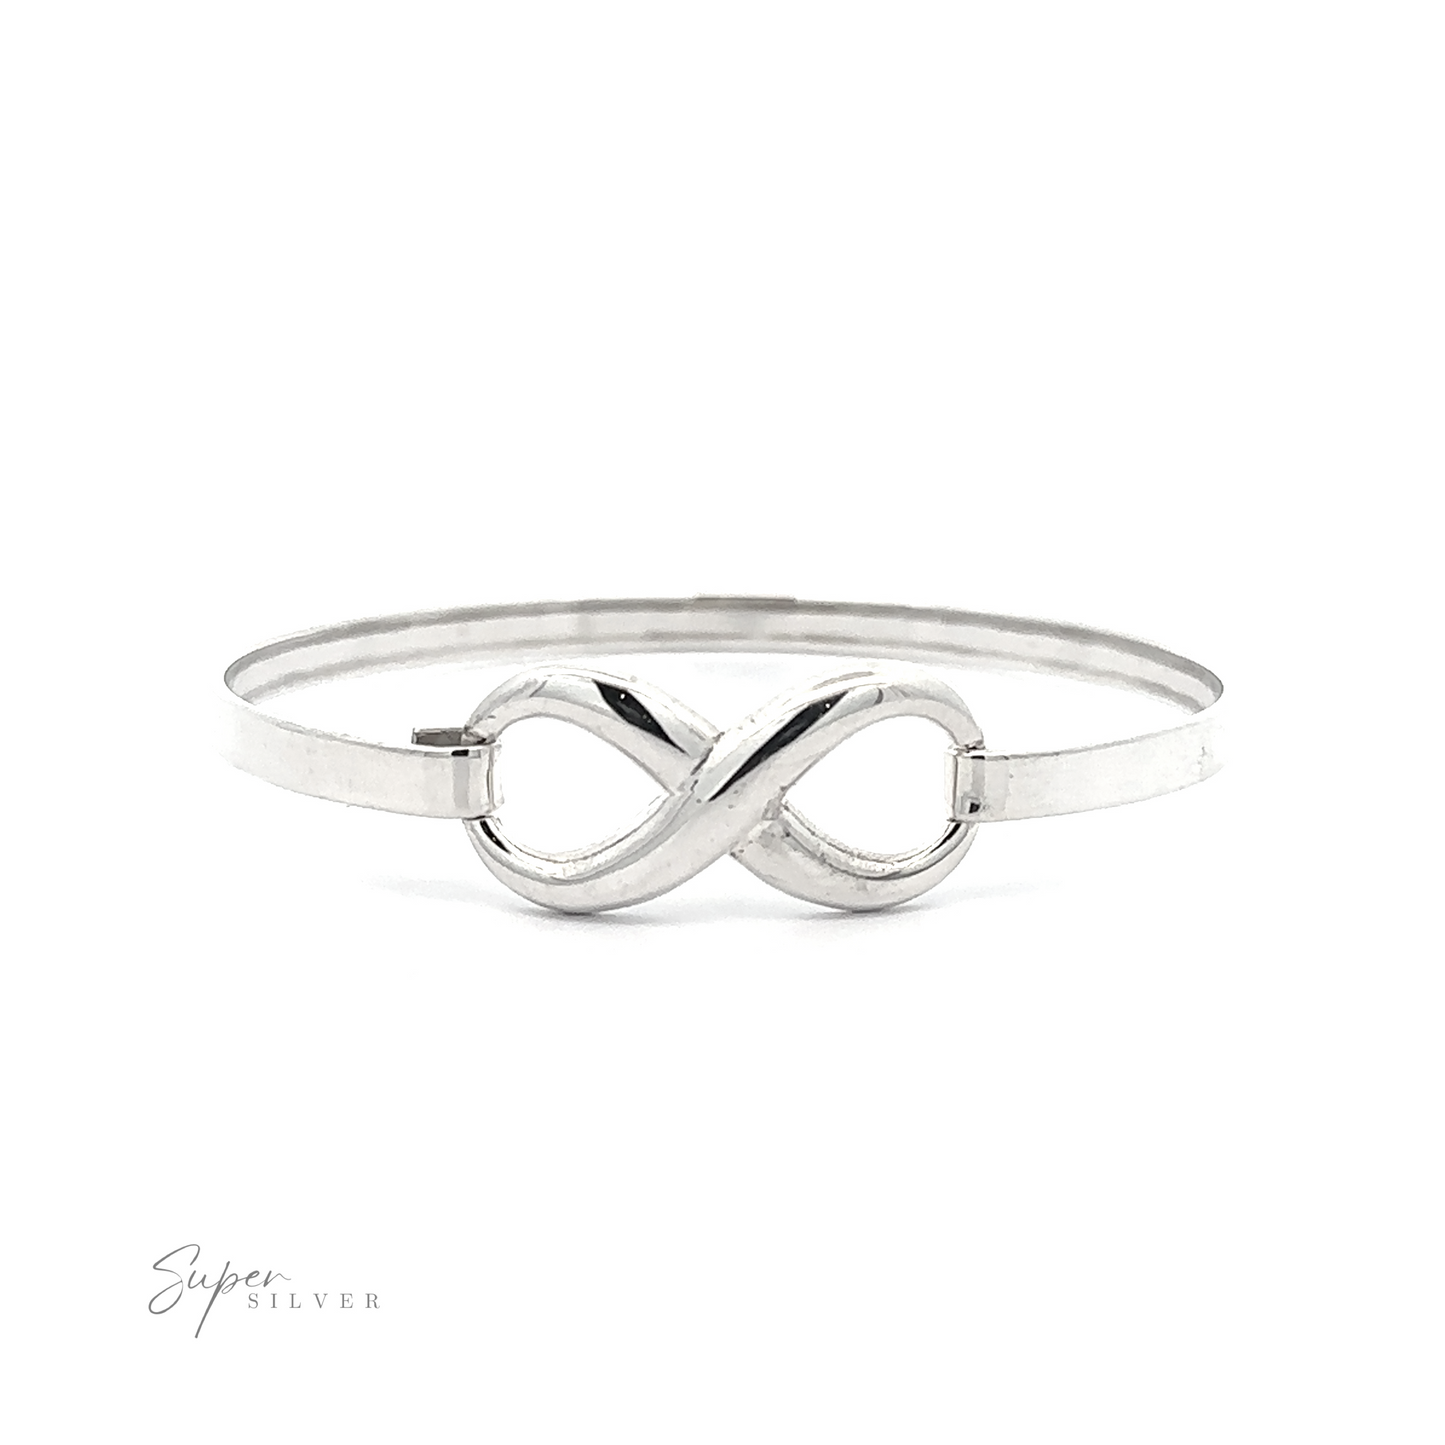 
                  
                    A sterling silver Infinity Bracelet featuring an infinity symbol at its center, secured with a latch clasp and adorned with the "Super Silver" logo at the bottom left.
                  
                